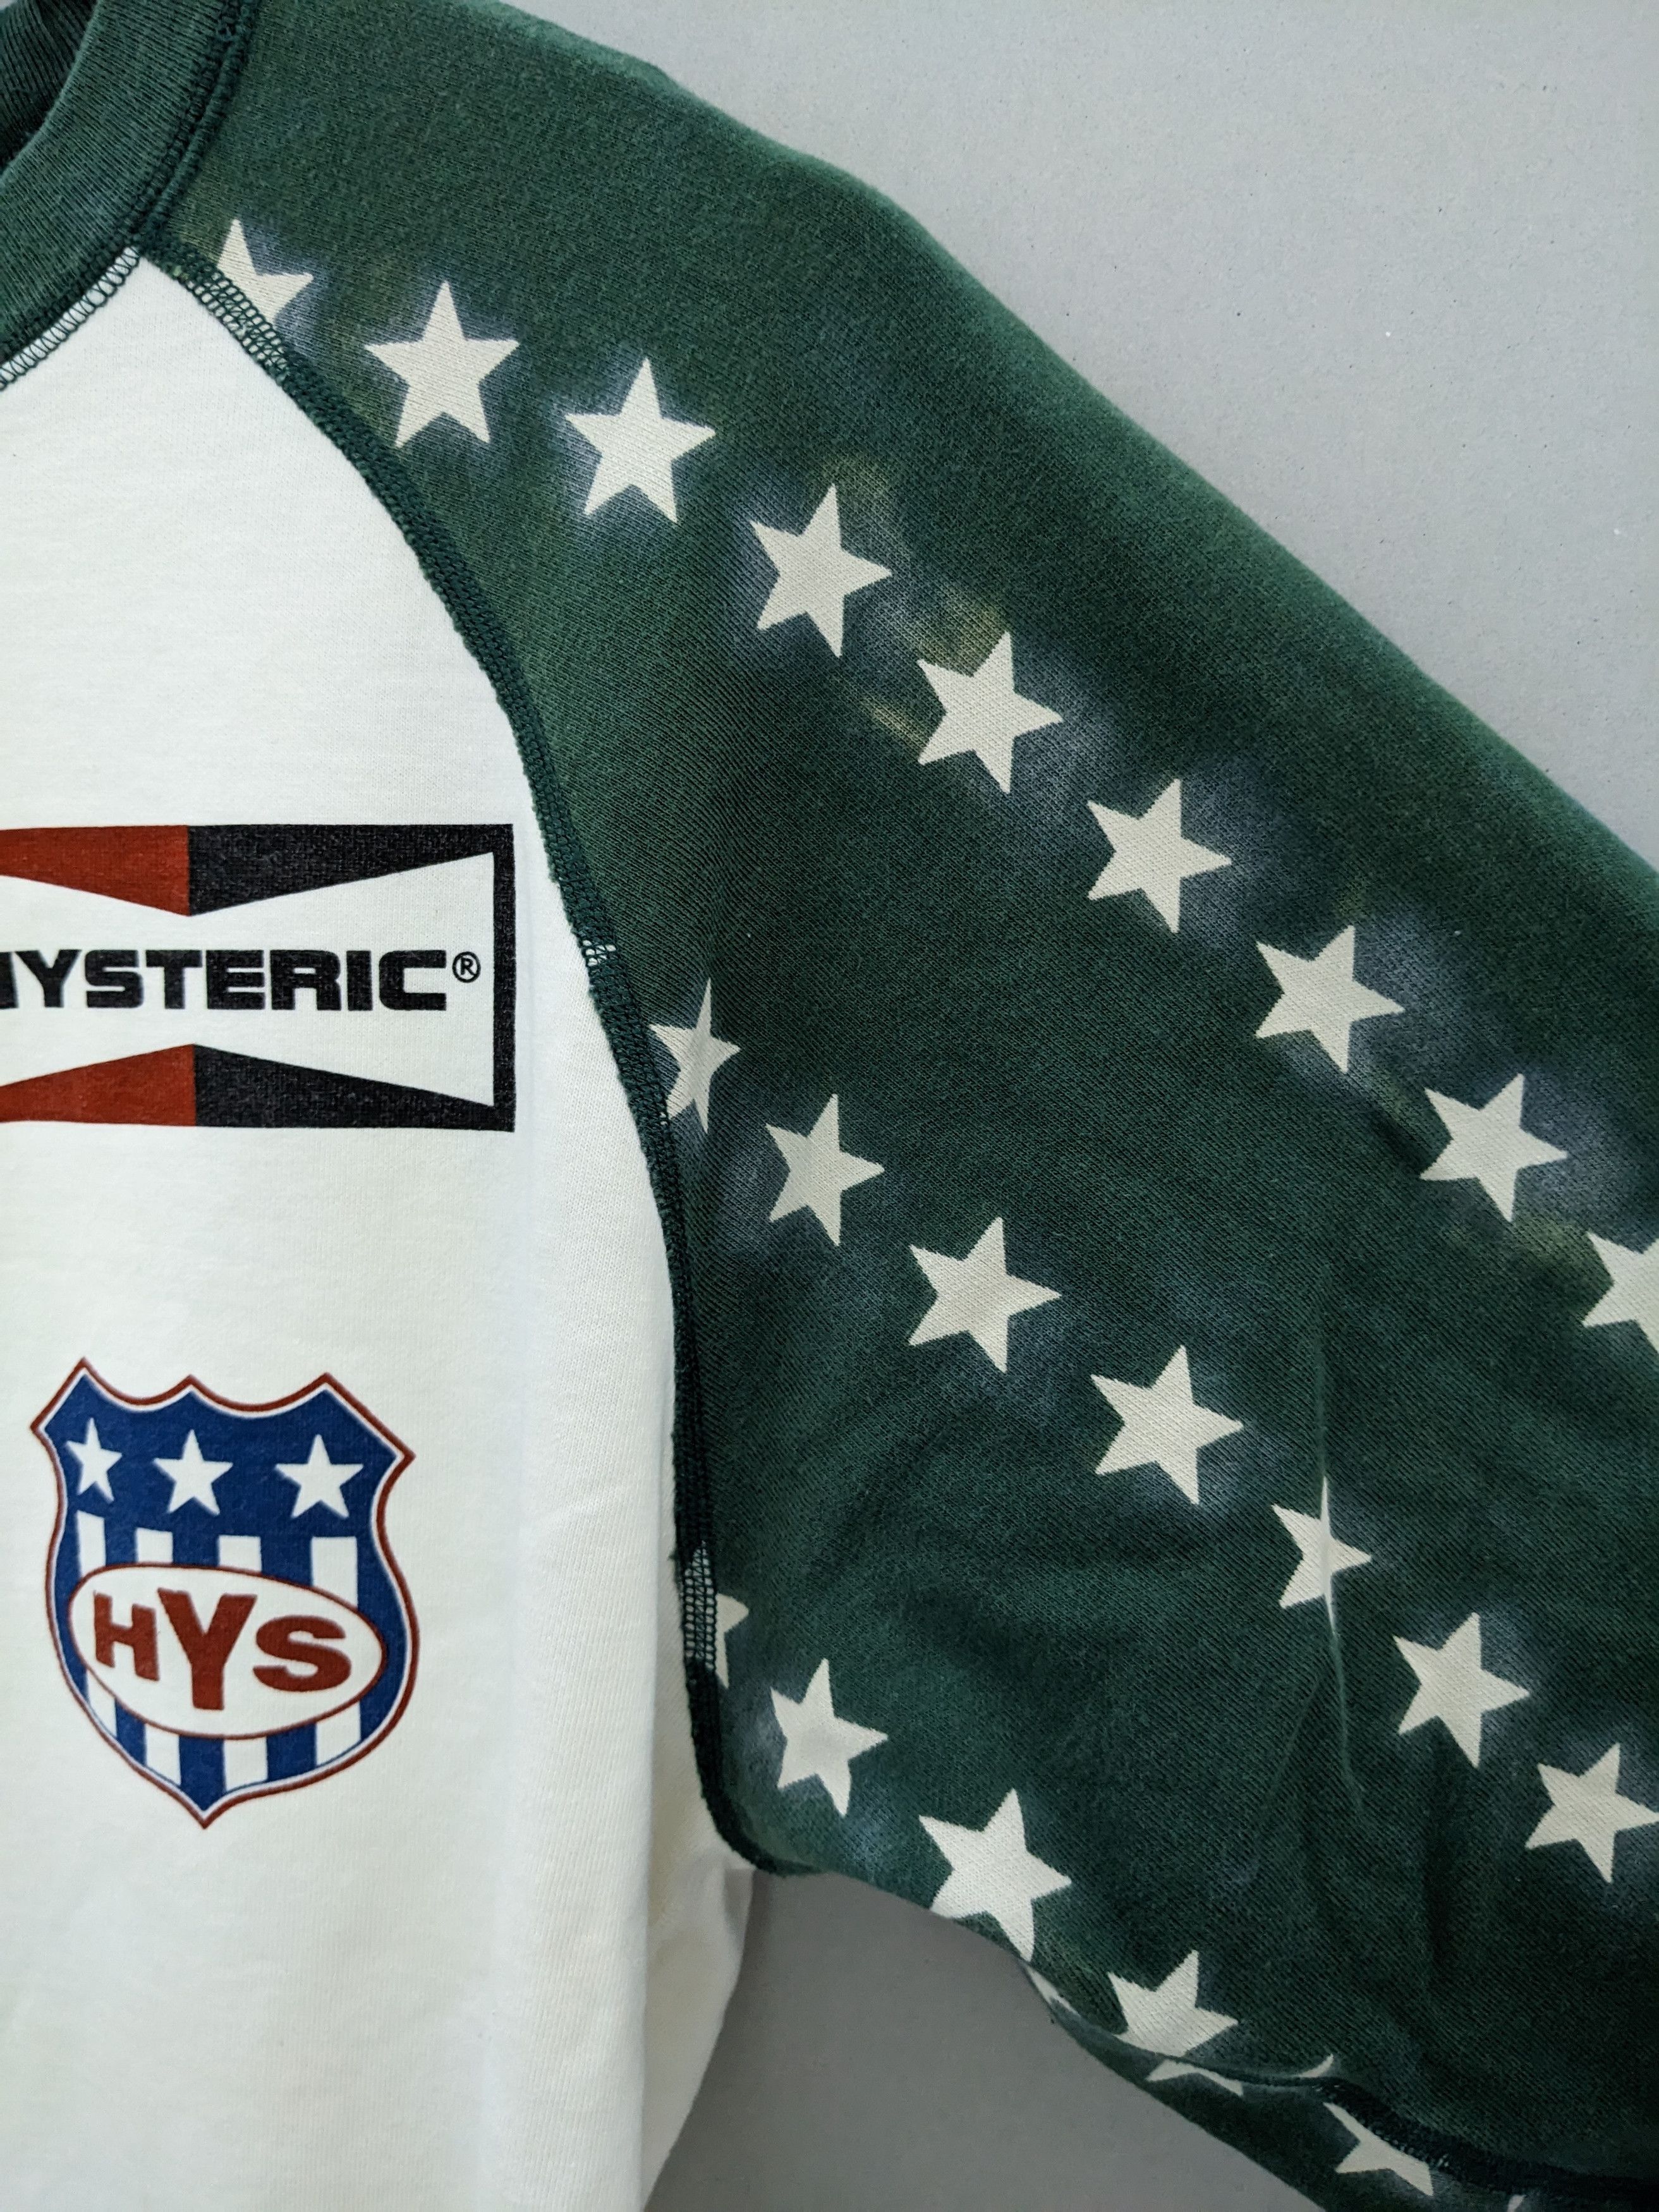 Hysteric Glamour Spellout White Green Stars Sweatshirt - 3